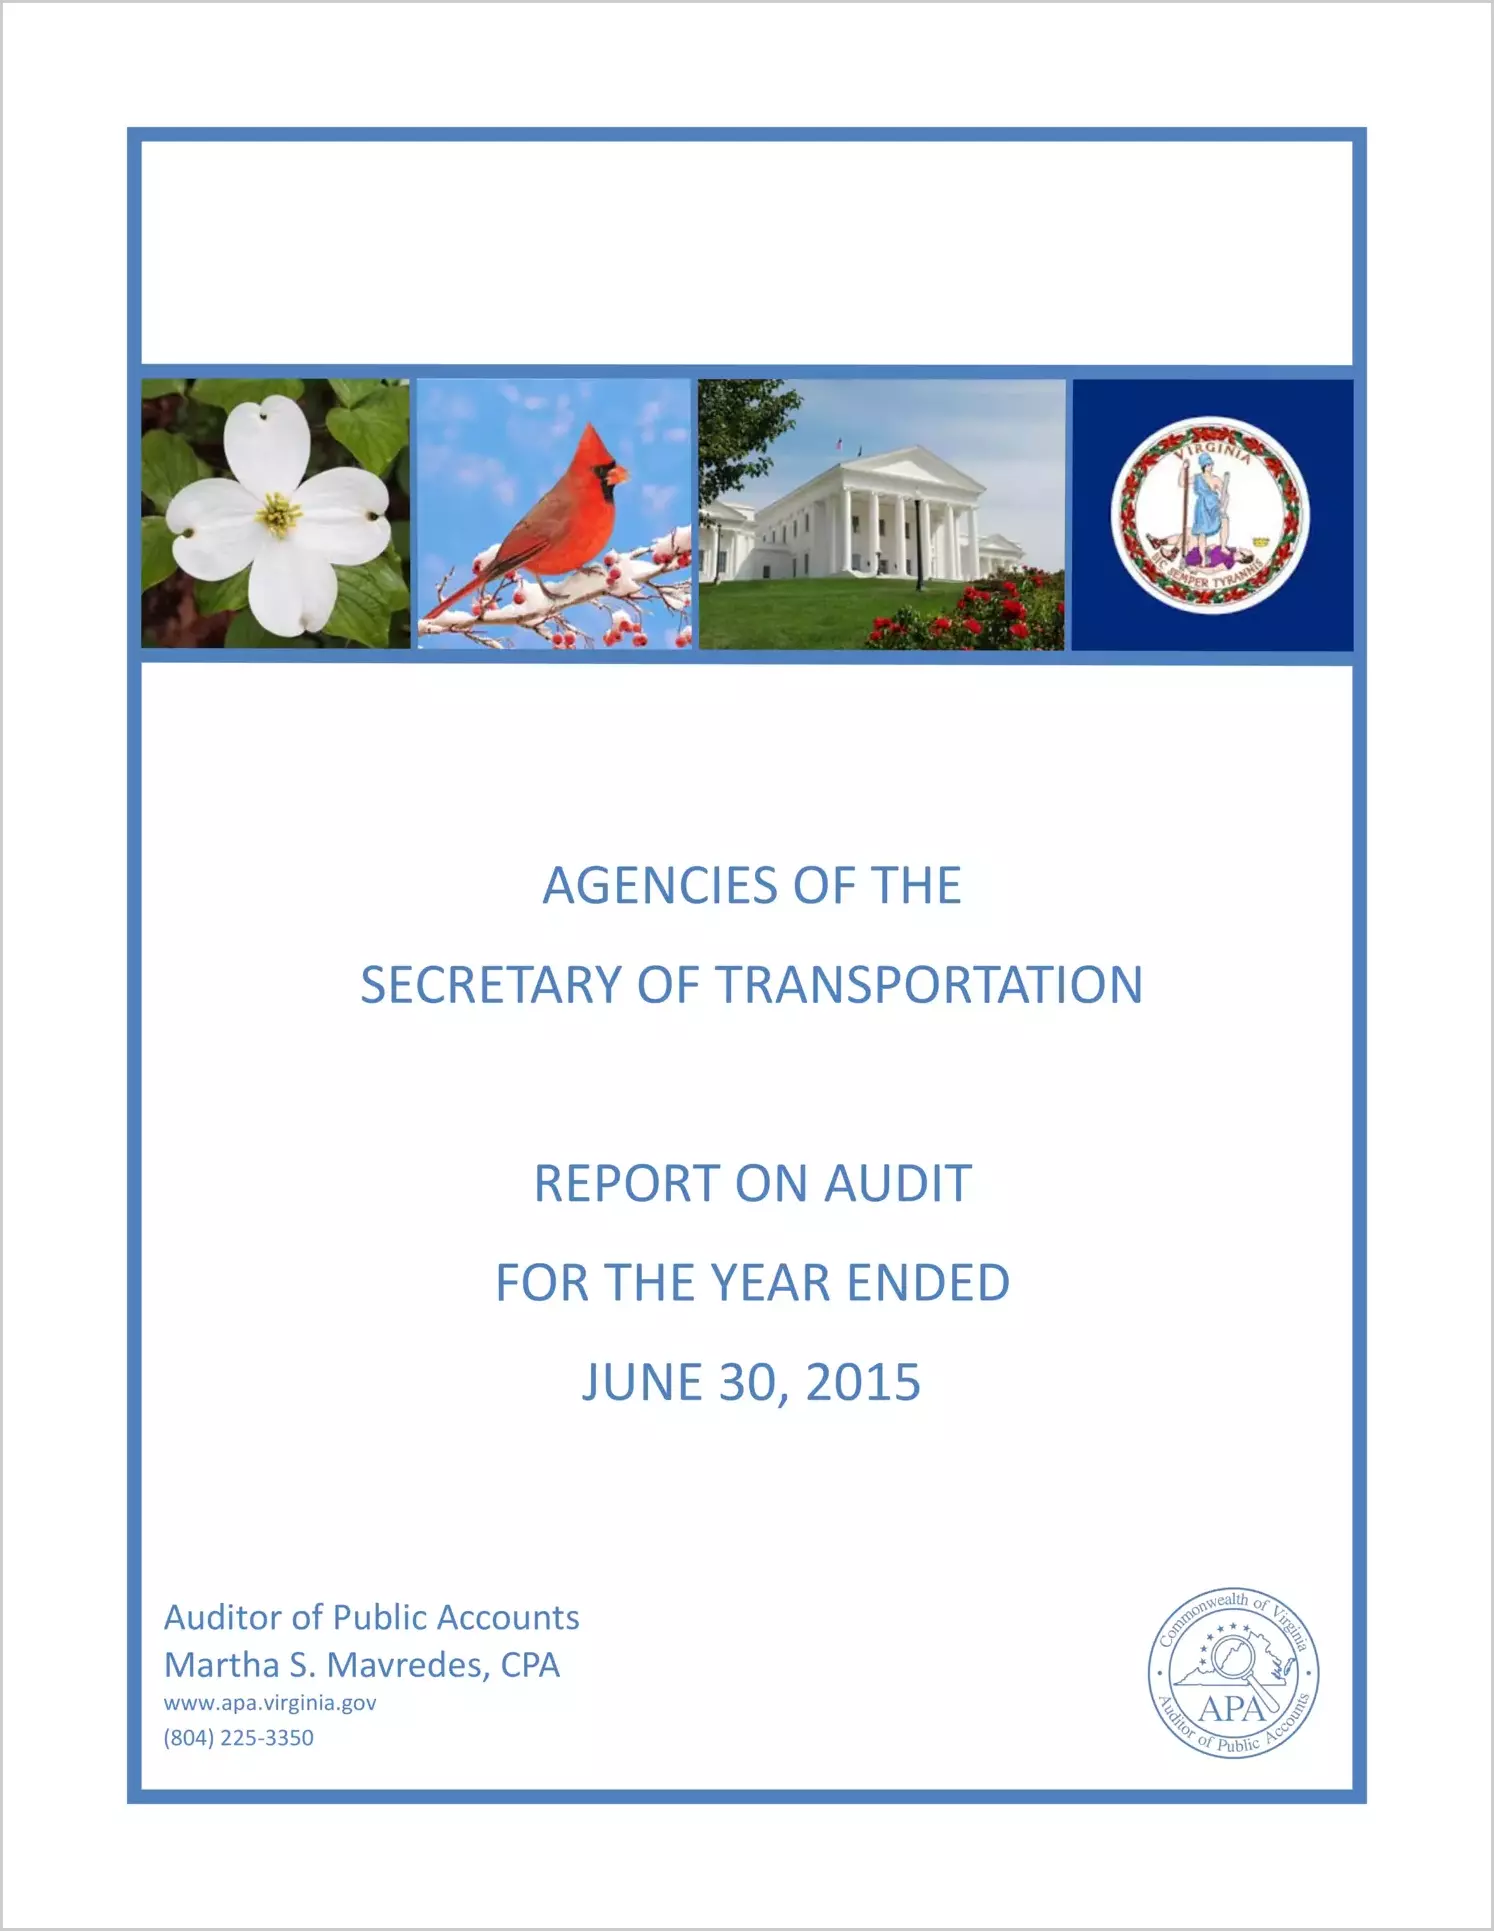 Agencies of the Secretary of Transportation for the year ended June 30, 2015